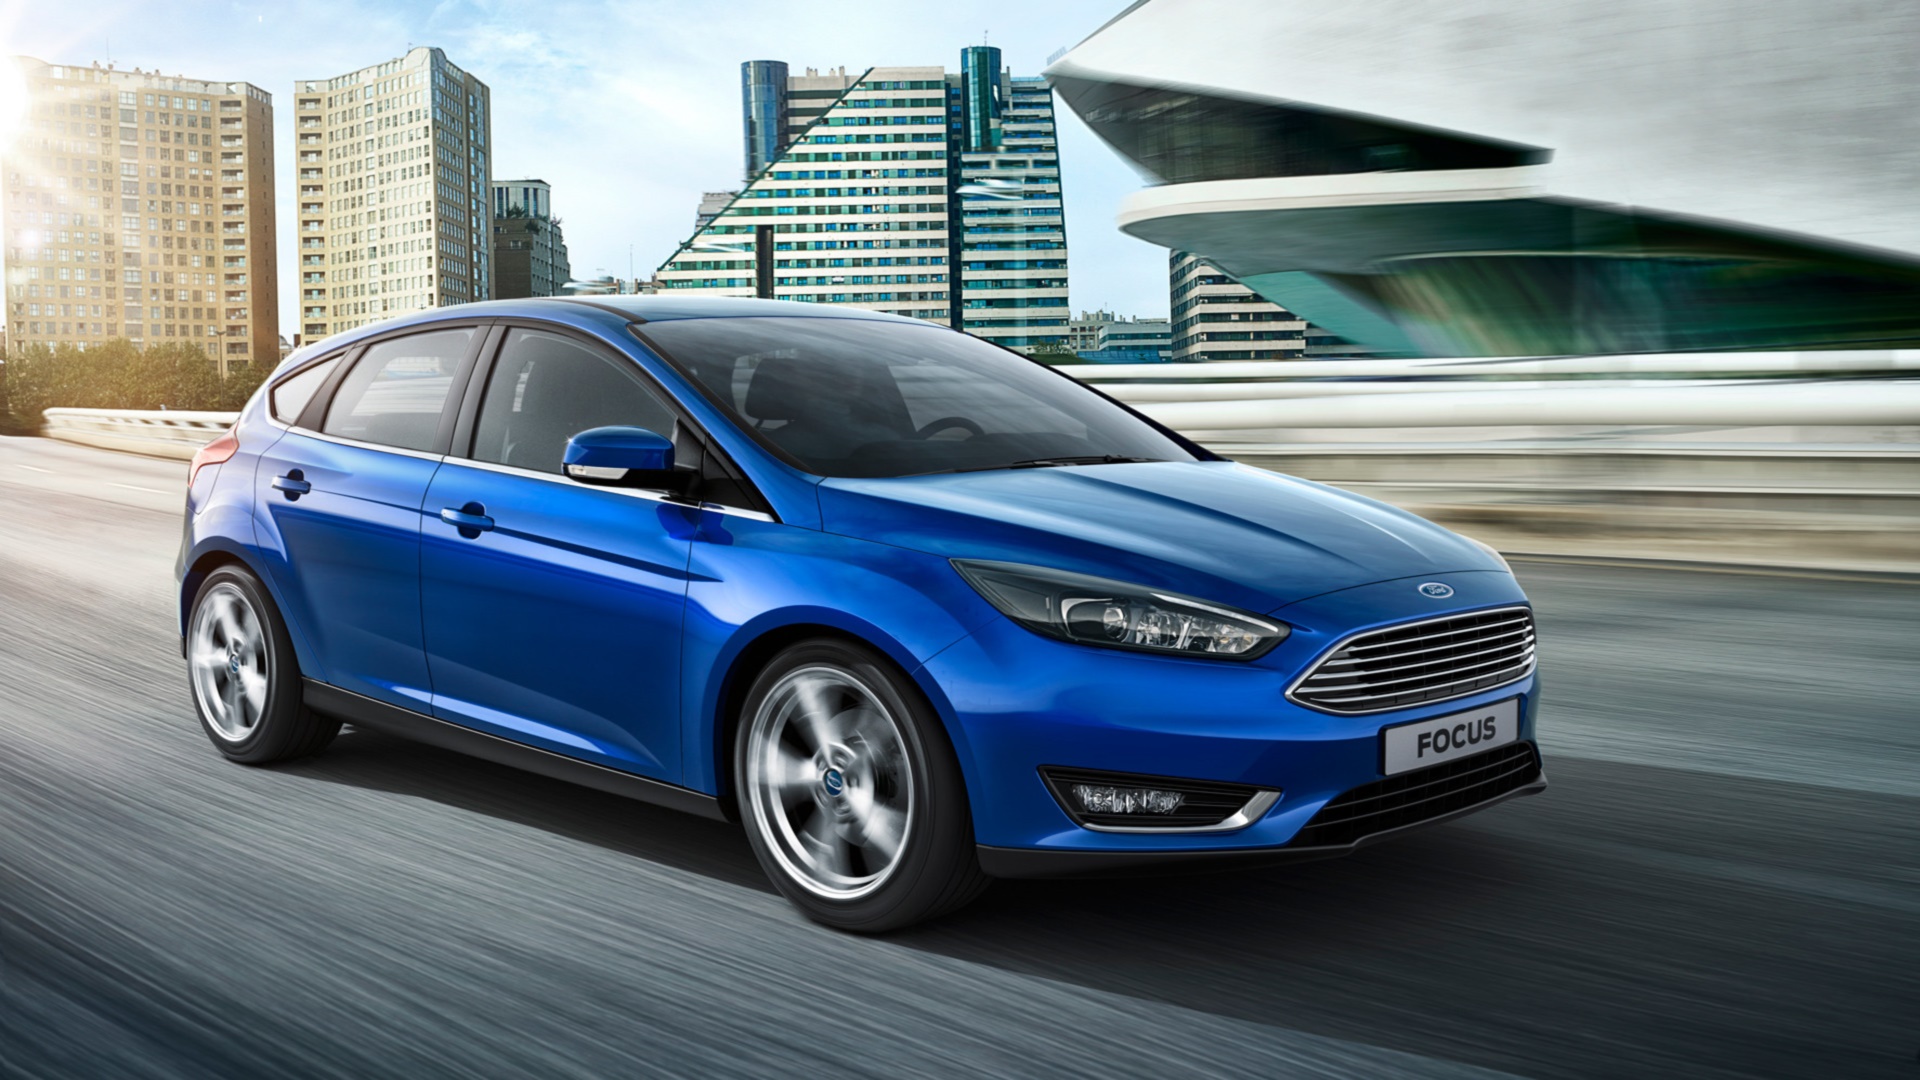 Vehicles 2015 Ford Focus HD Wallpaper | Background Image